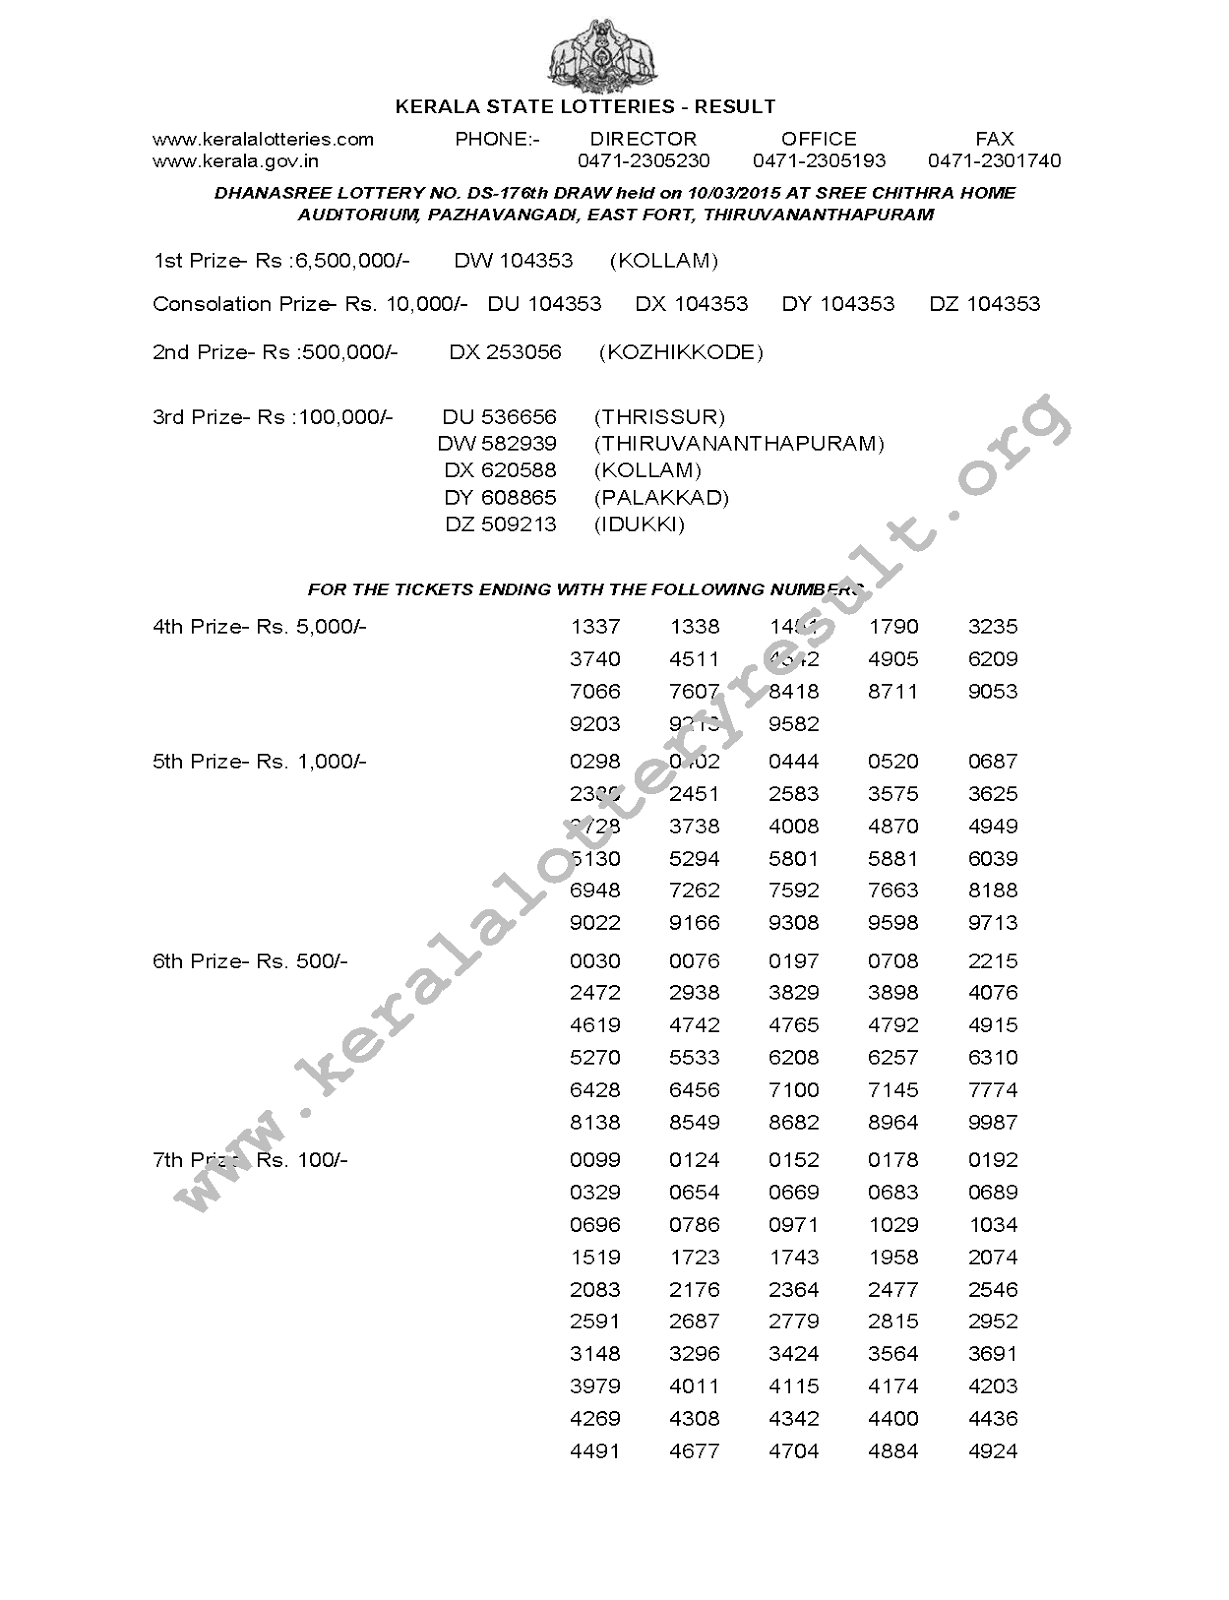 DHANASREE Lottery DS 176 Result 10-3-2015